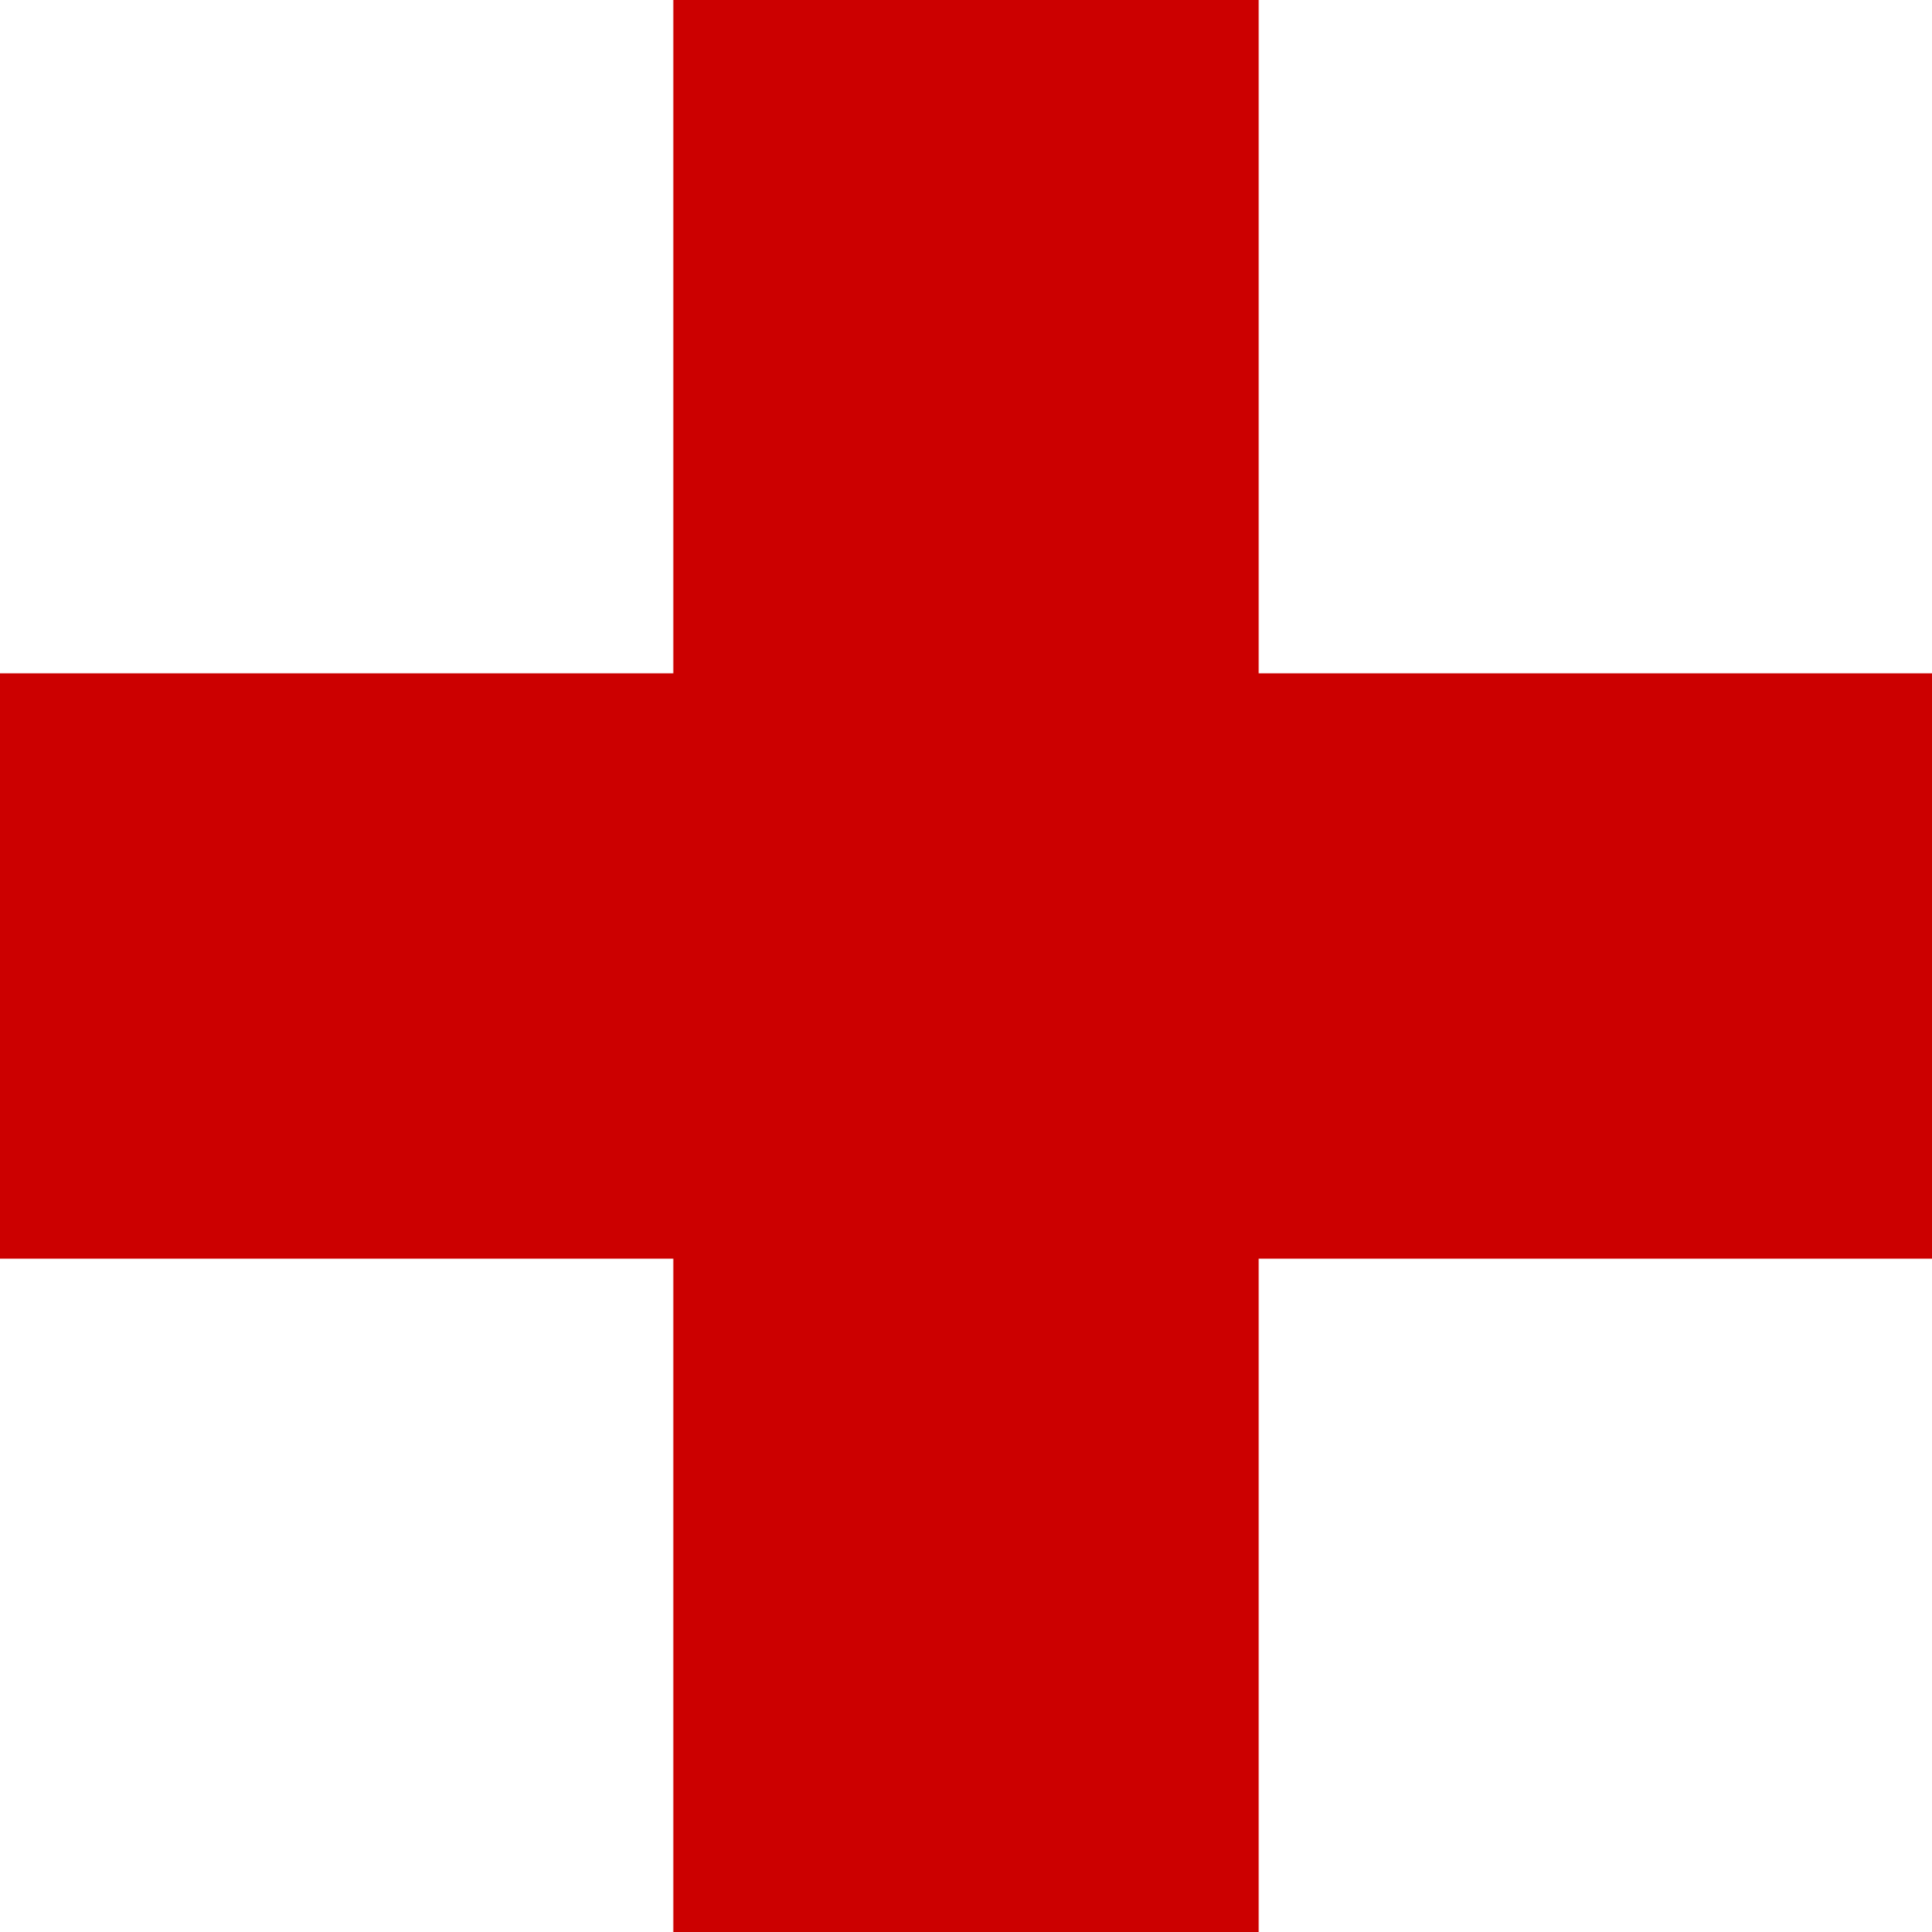 File:Red Cross icon.svg Wikimedia Commons